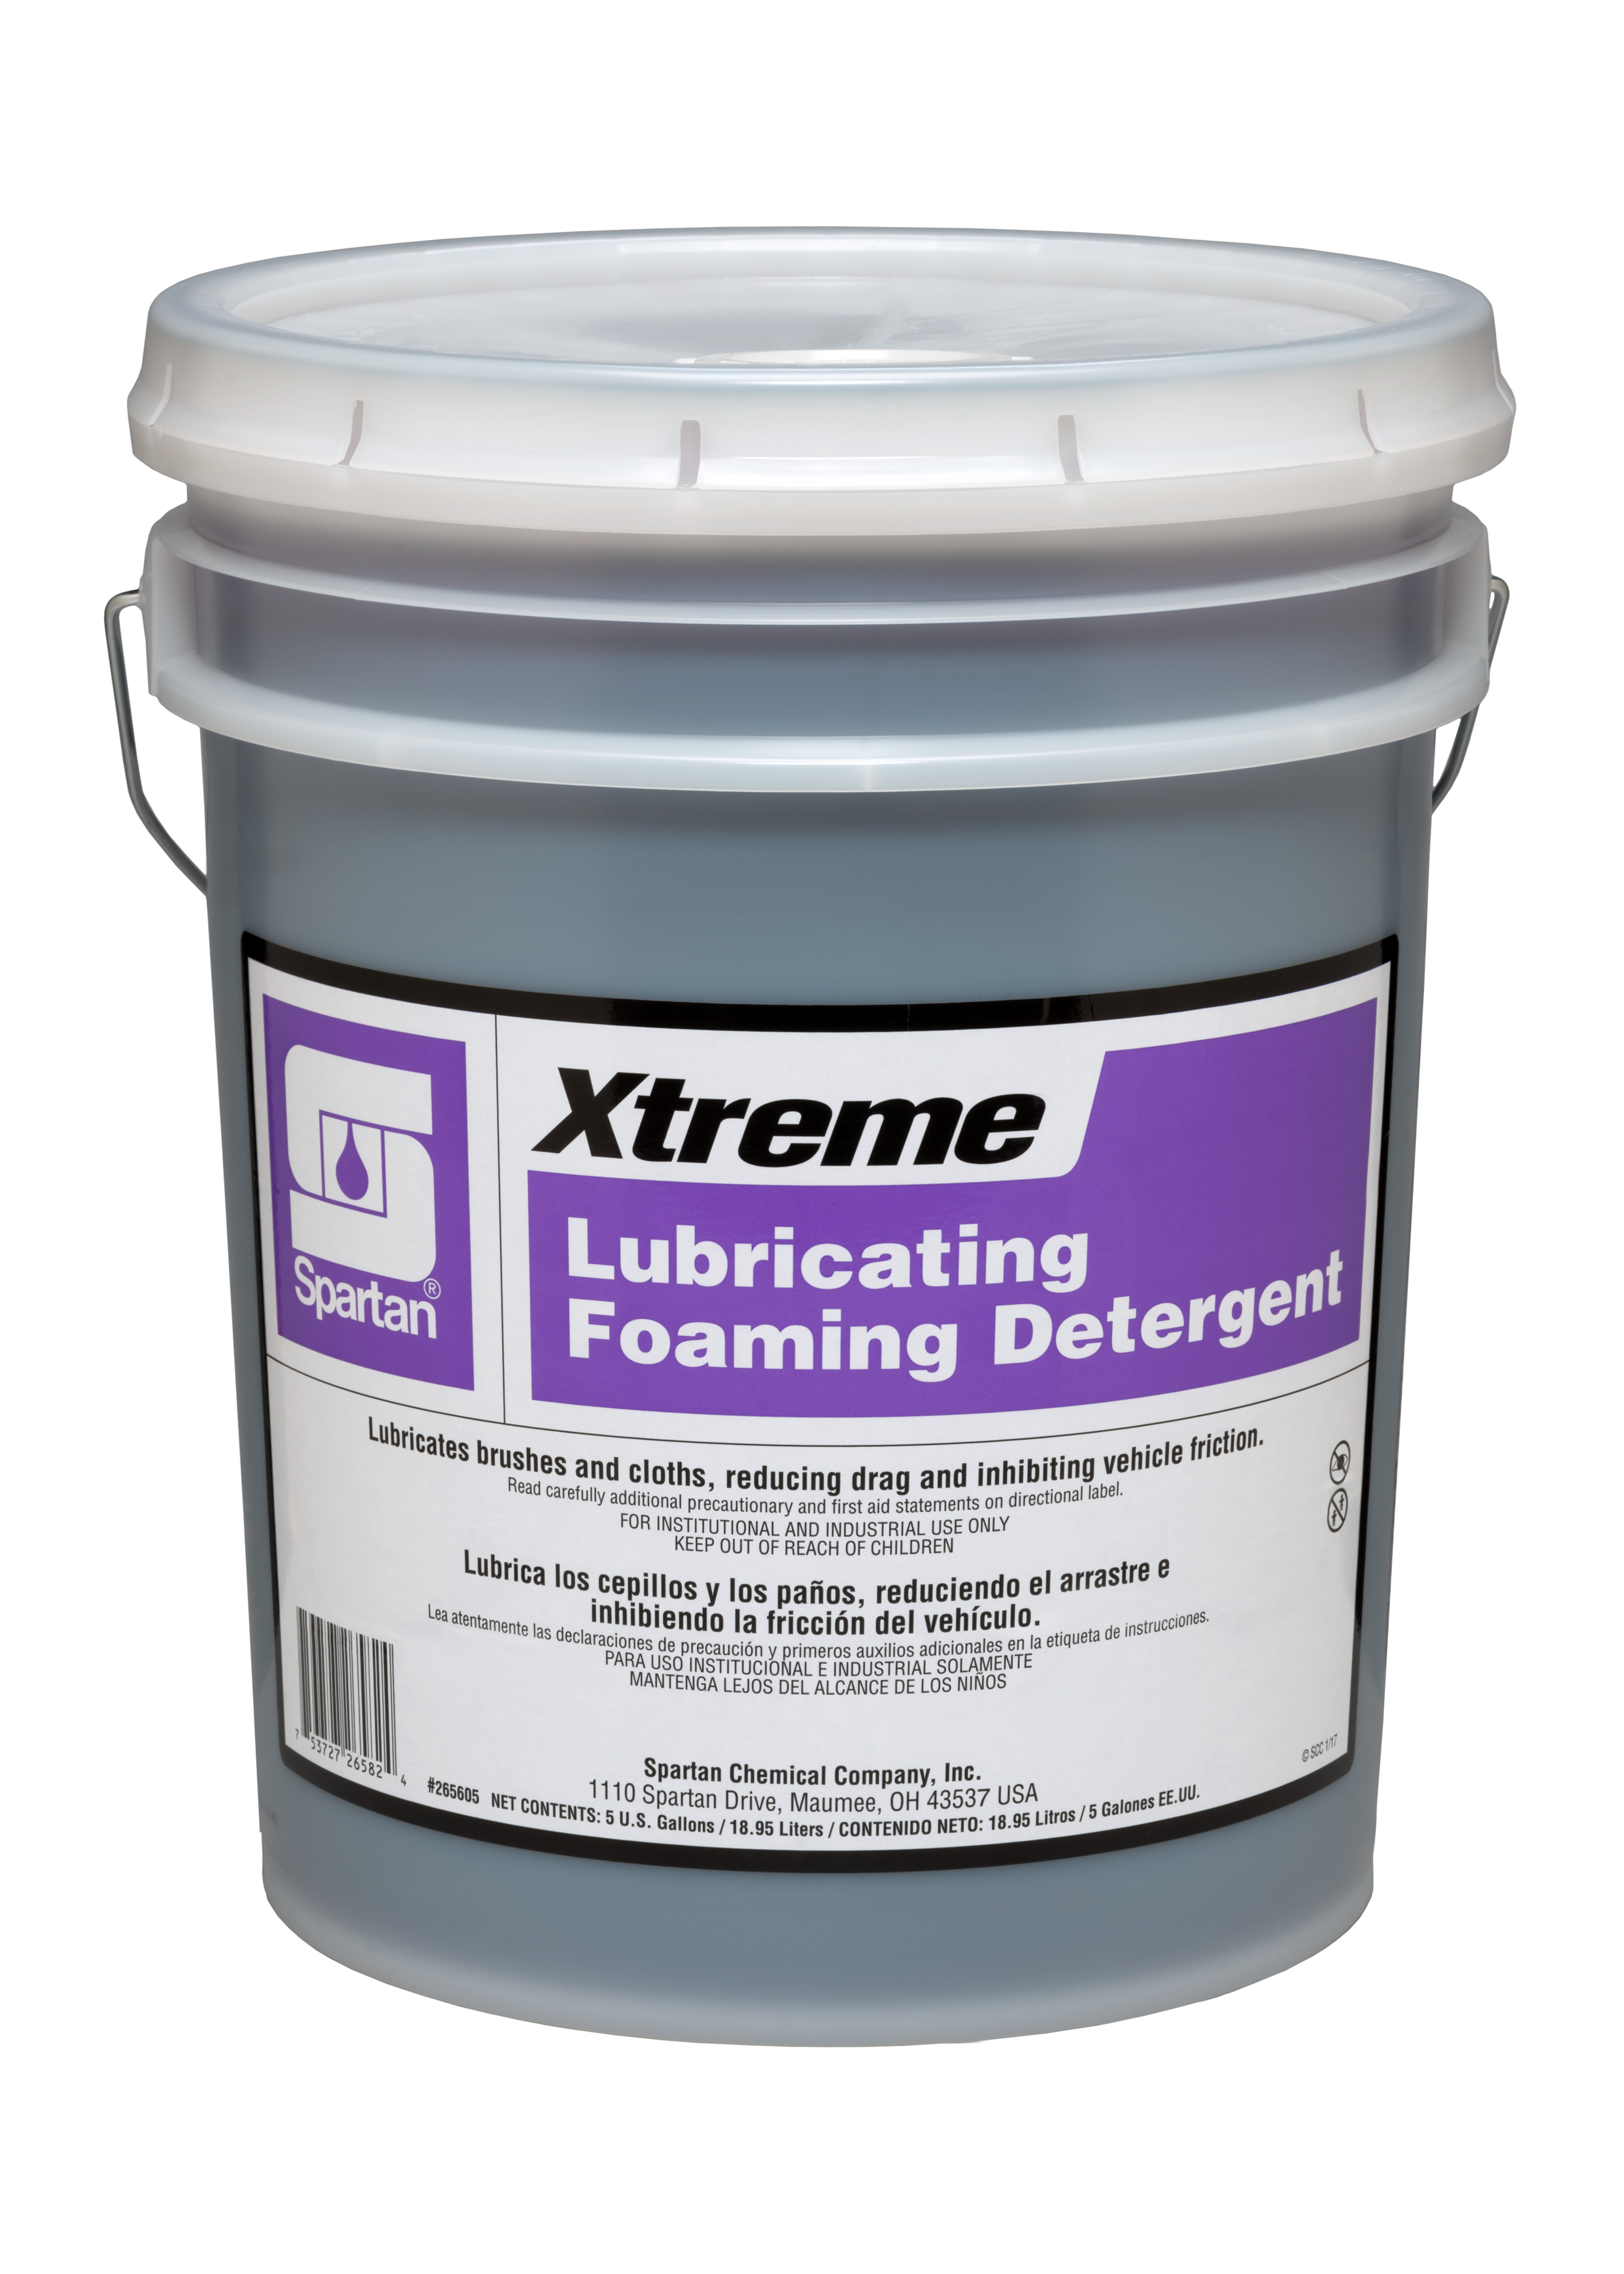 Spartan Chemical Company Xtreme Lubricating Foaming Detergent, 5 GAL PAIL